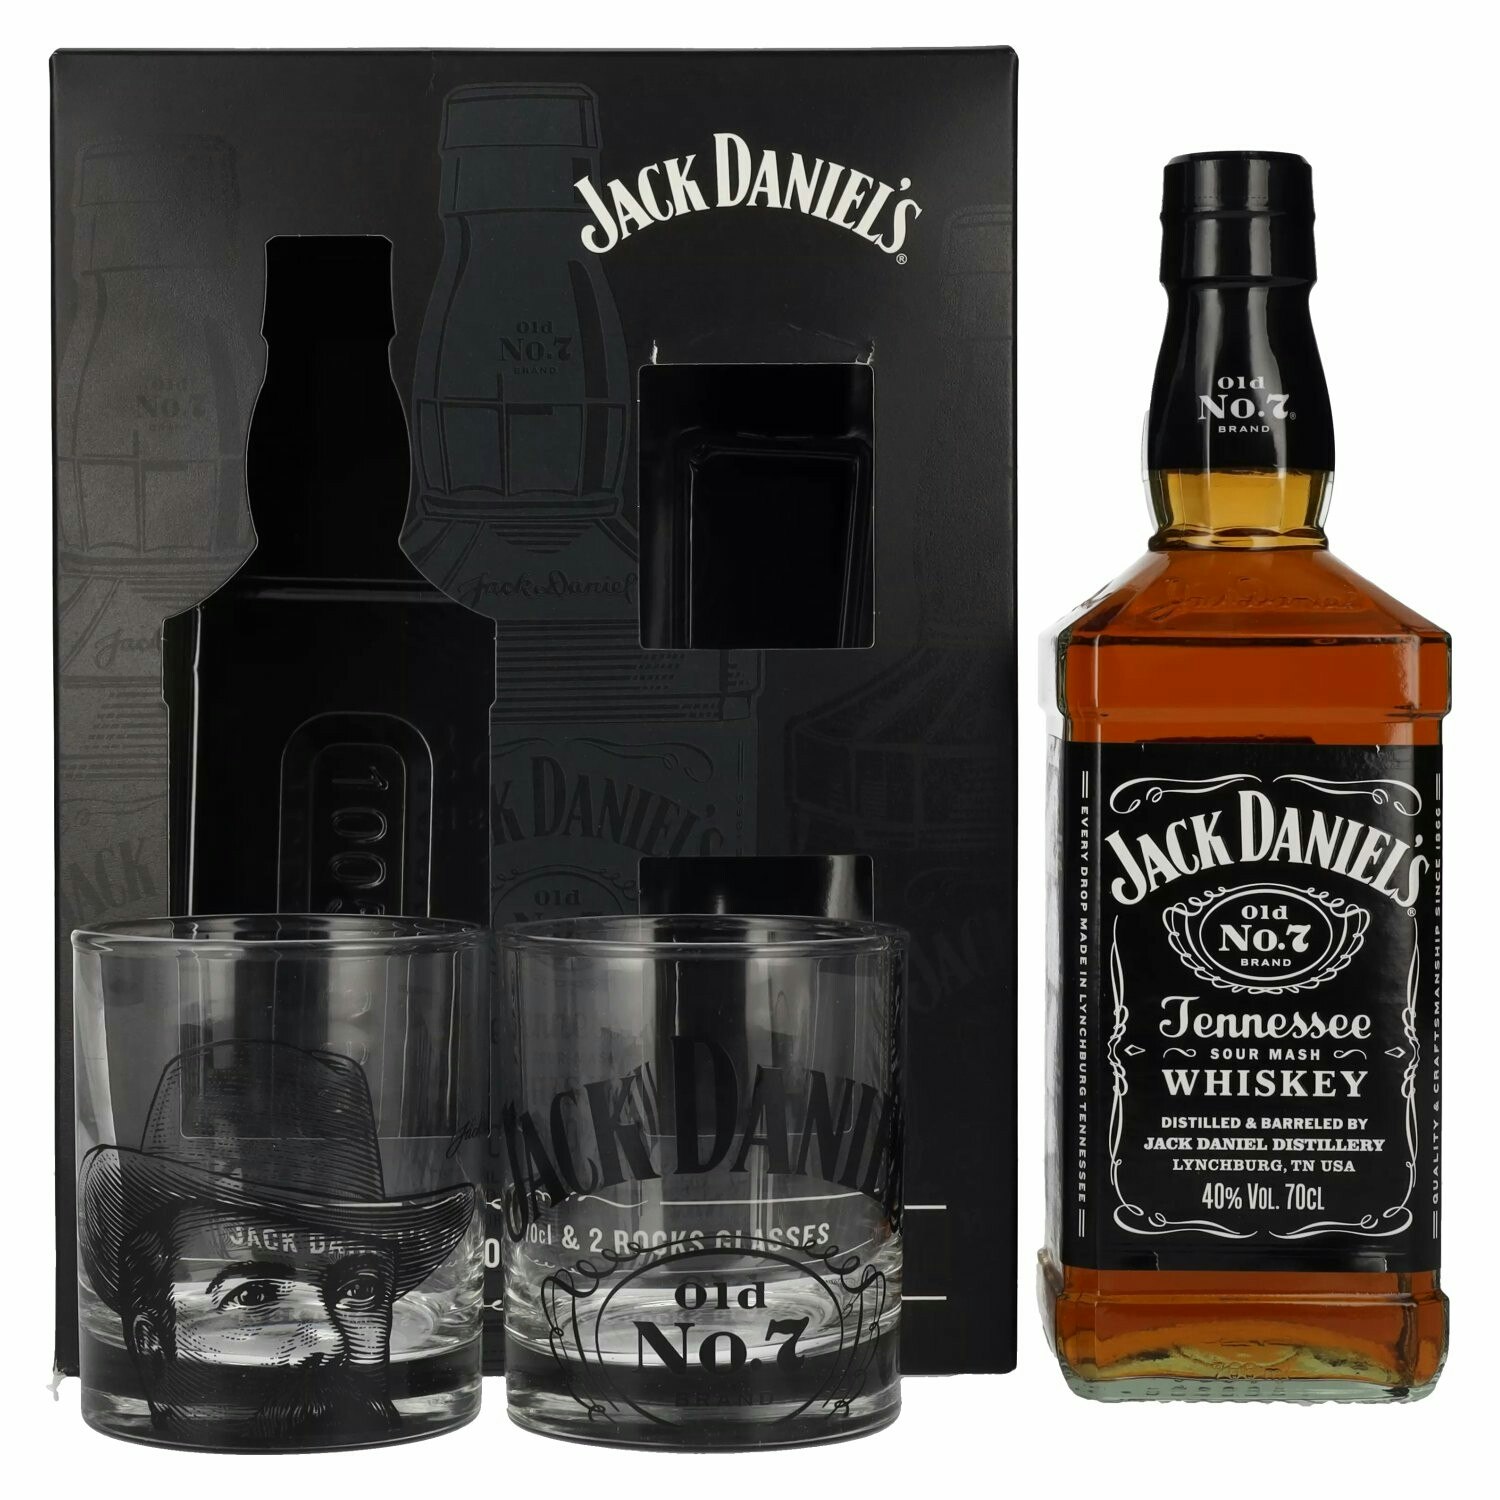 Jack Daniel's Tennessee Whiskey 40% Vol. 0,7l in Giftbox with 2 Rocks glasses